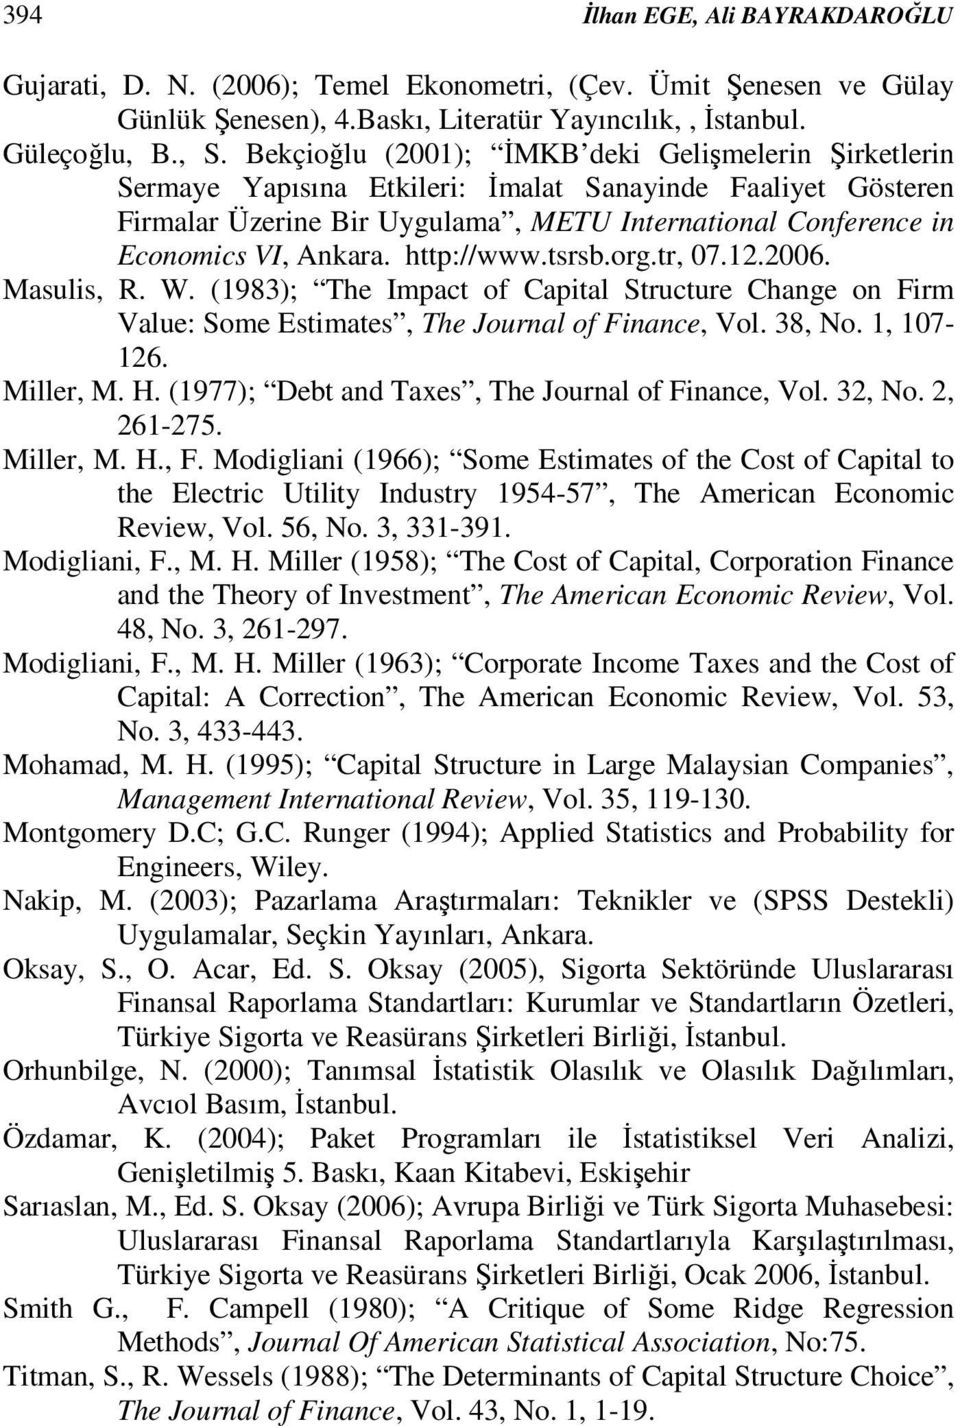 http://www.tsrsb.org.tr, 07.12.2006. Masulis, R. W. (1983); The Impact of Capital Structure Change on Firm Value: Some Estimates, The Journal of Finance, Vol. 38, No. 1, 107-126. Miller, M. H.